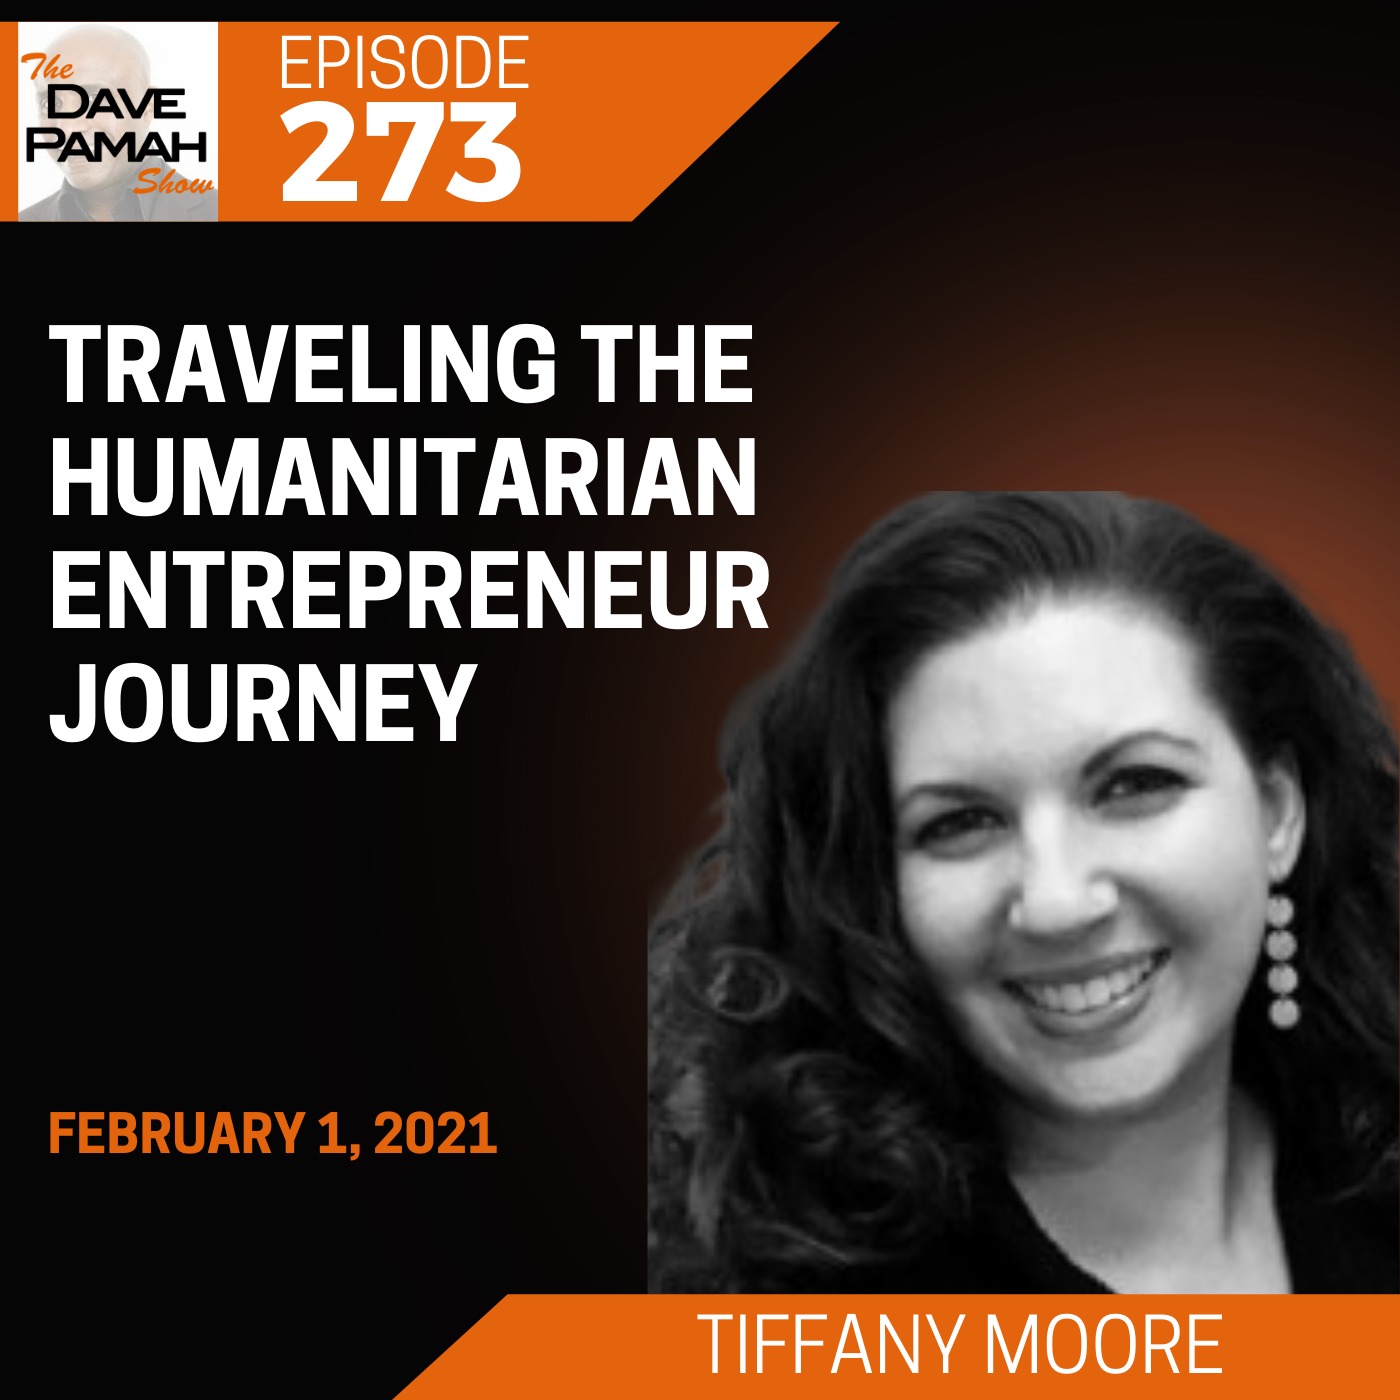 Traveling the humanitarian entrepreneur journey with Tiffany Moore Image